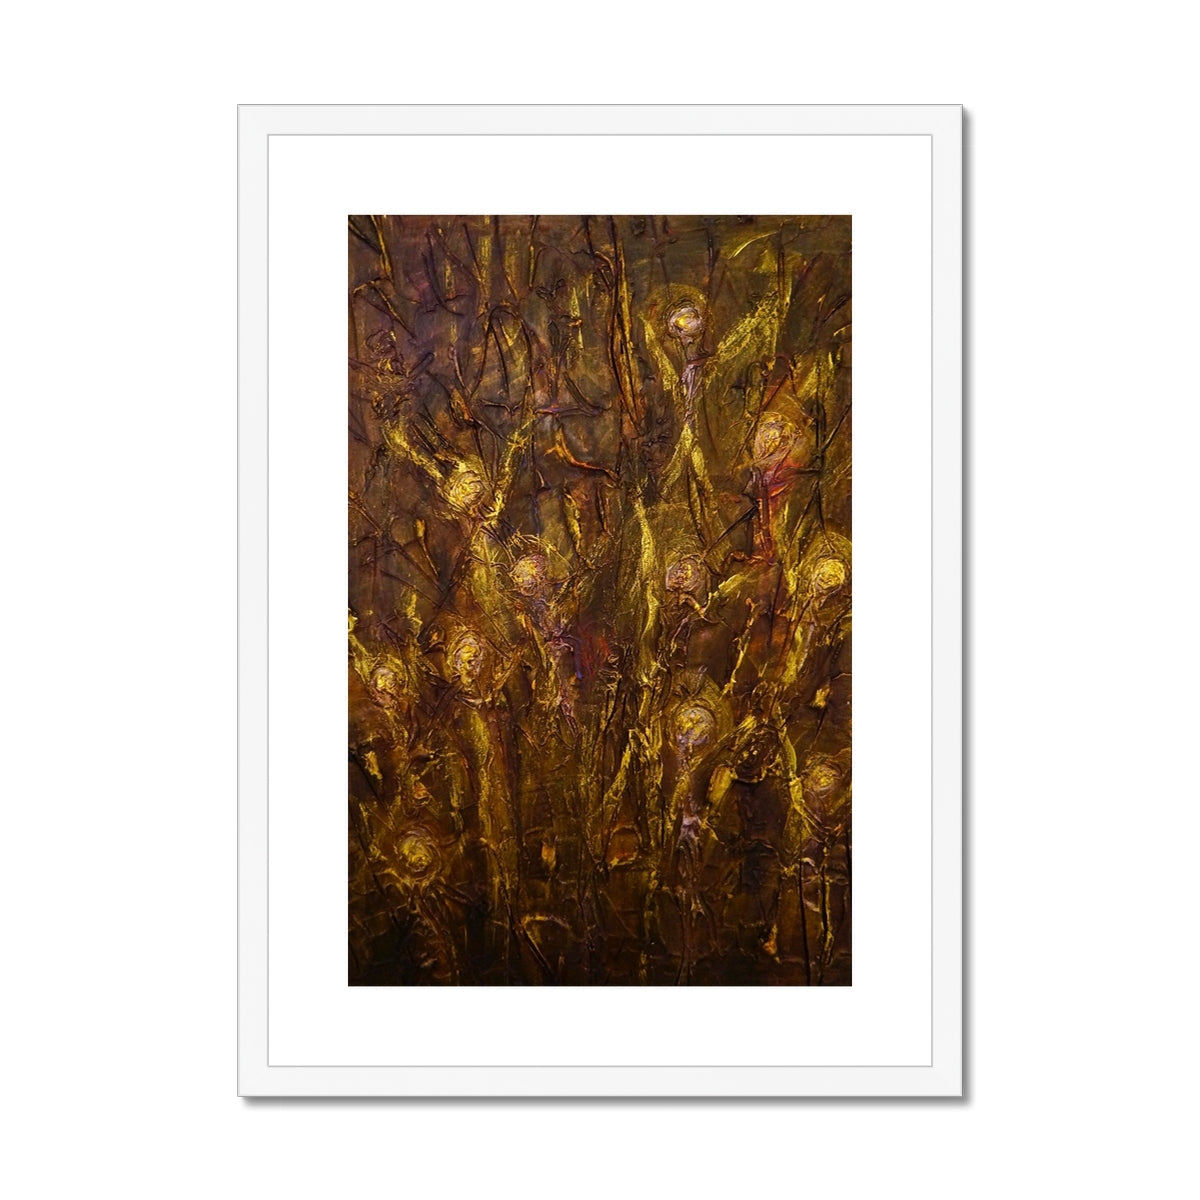 Tam O Shanter Witches Painting | Framed & Mounted Prints From Scotland-Framed & Mounted Prints-Abstract & Impressionistic Art Gallery-A2 Portrait-White Frame-Paintings, Prints, Homeware, Art Gifts From Scotland By Scottish Artist Kevin Hunter